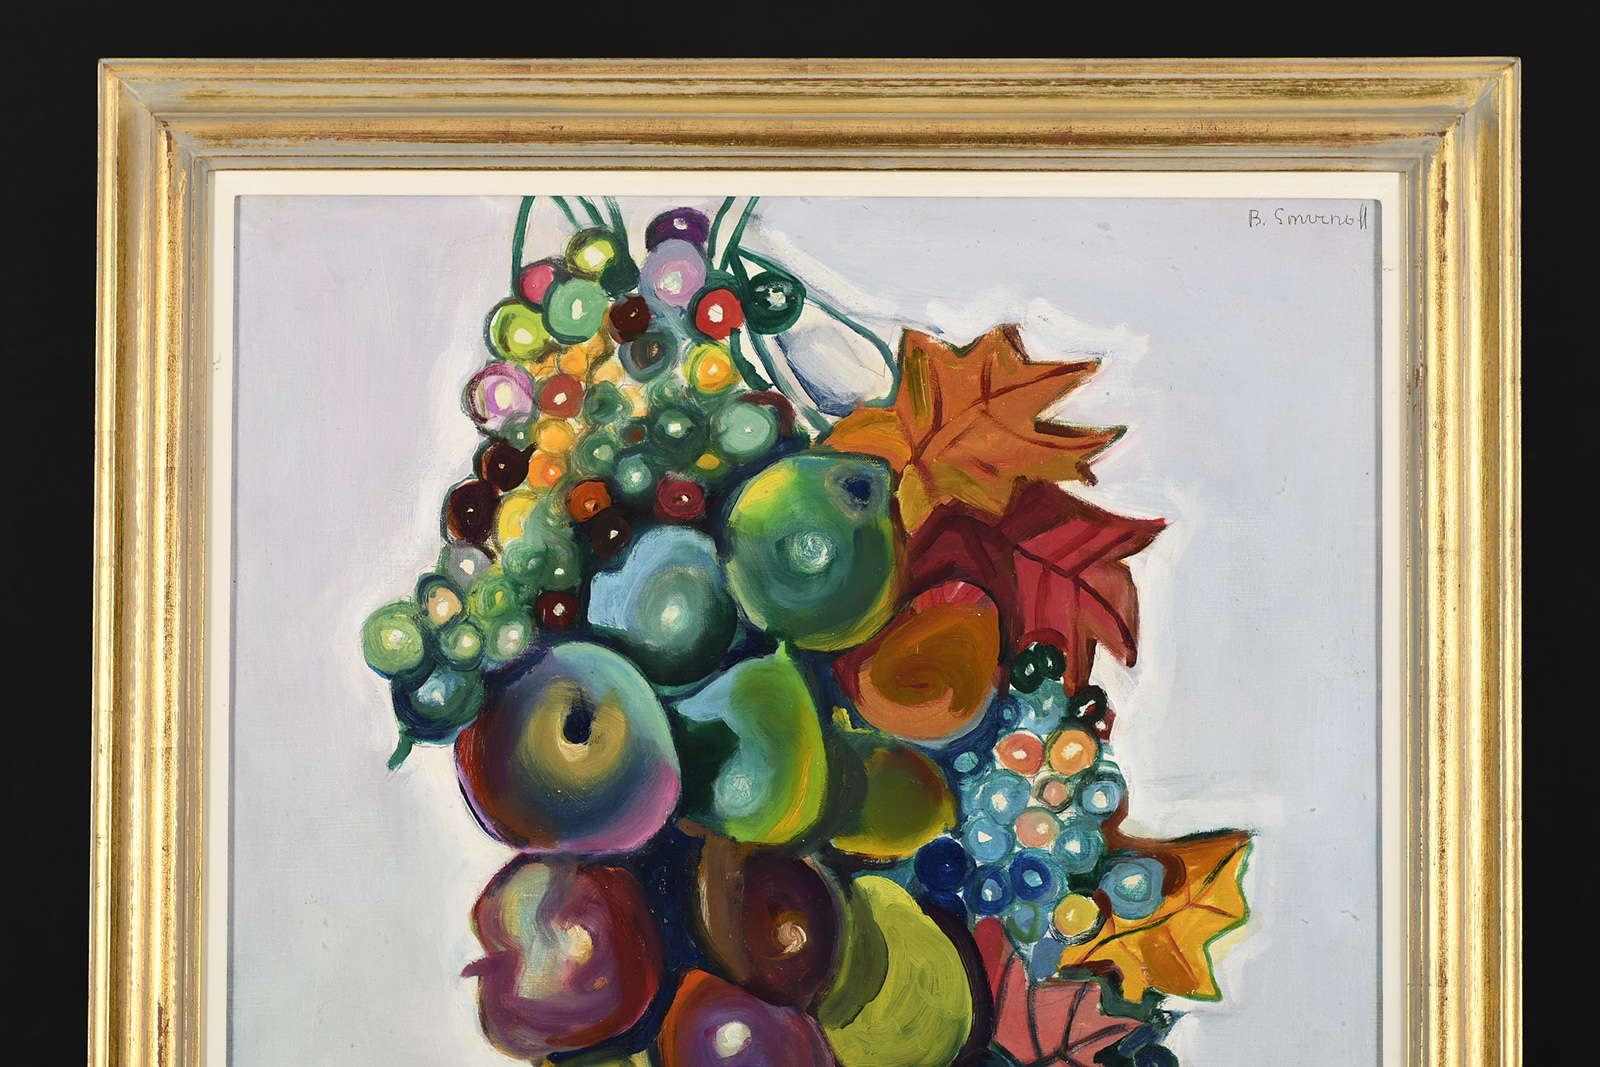 Original Painting by Boris Smirnoff (1895-1976) Titled ""Fruit with White Background"" - Image 5 of 8